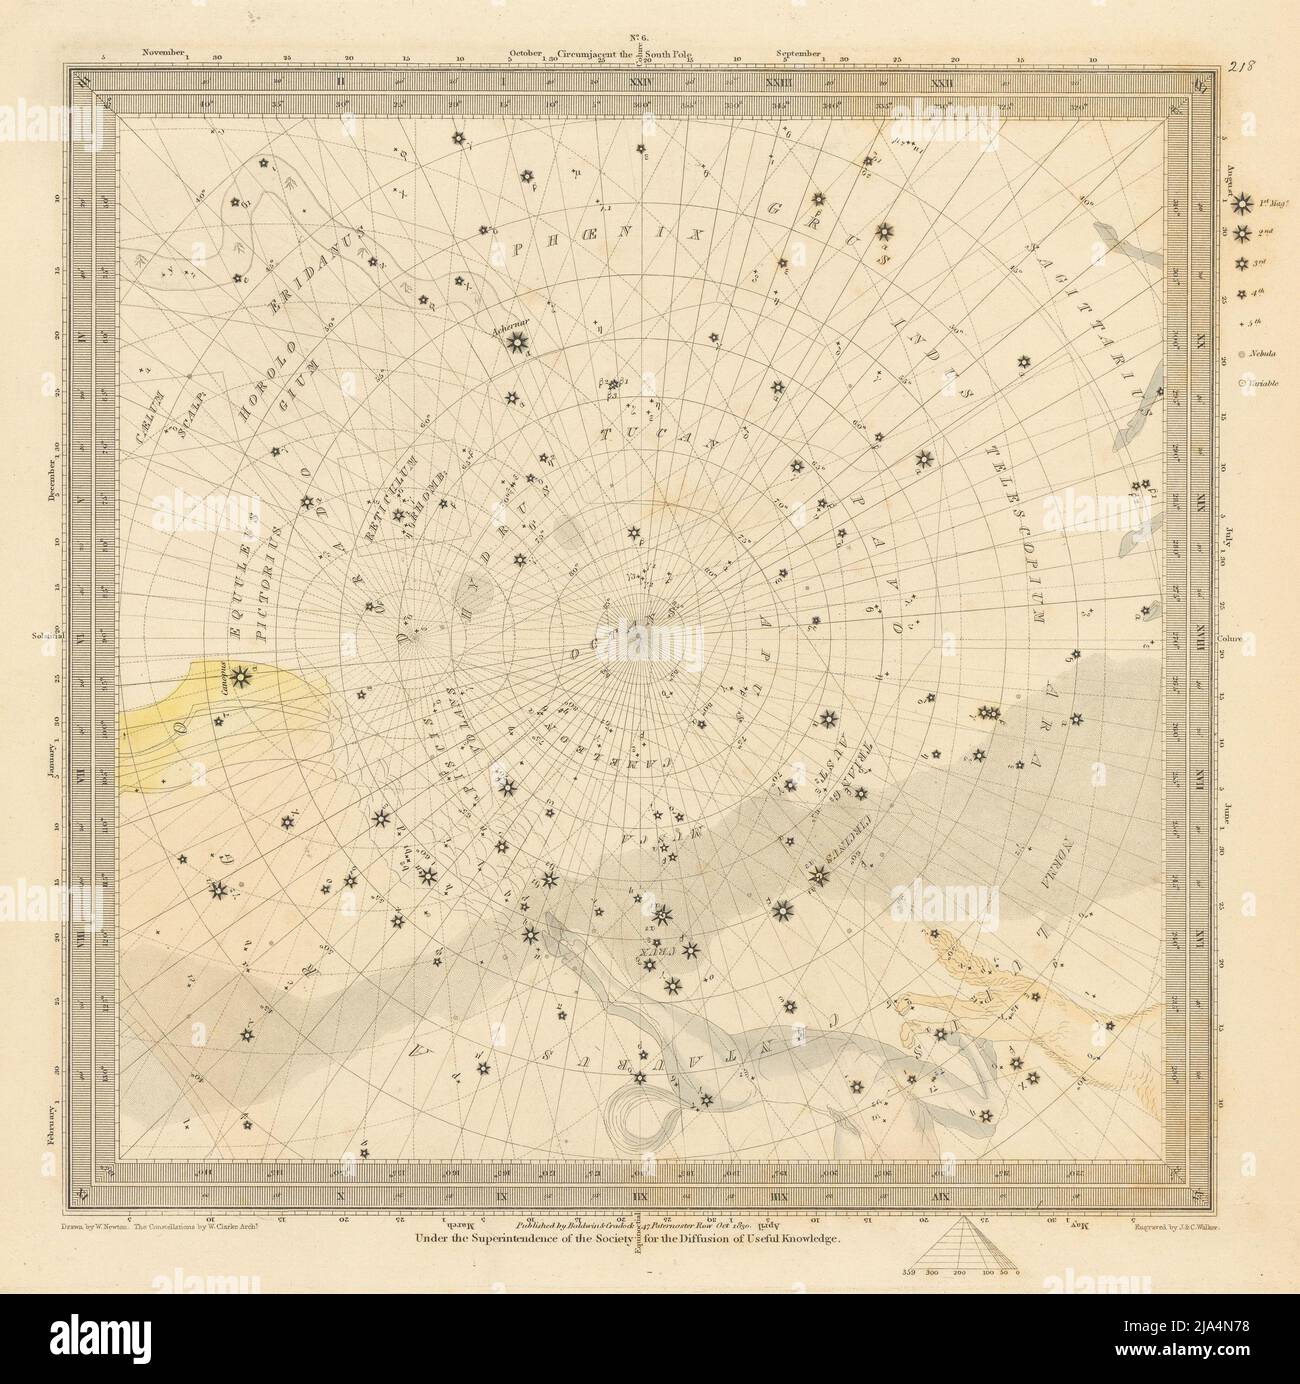 ASTRONOMY CELESTIAL Star map chart 6 South Pole. SDUK 1847 old antique Stock Photo